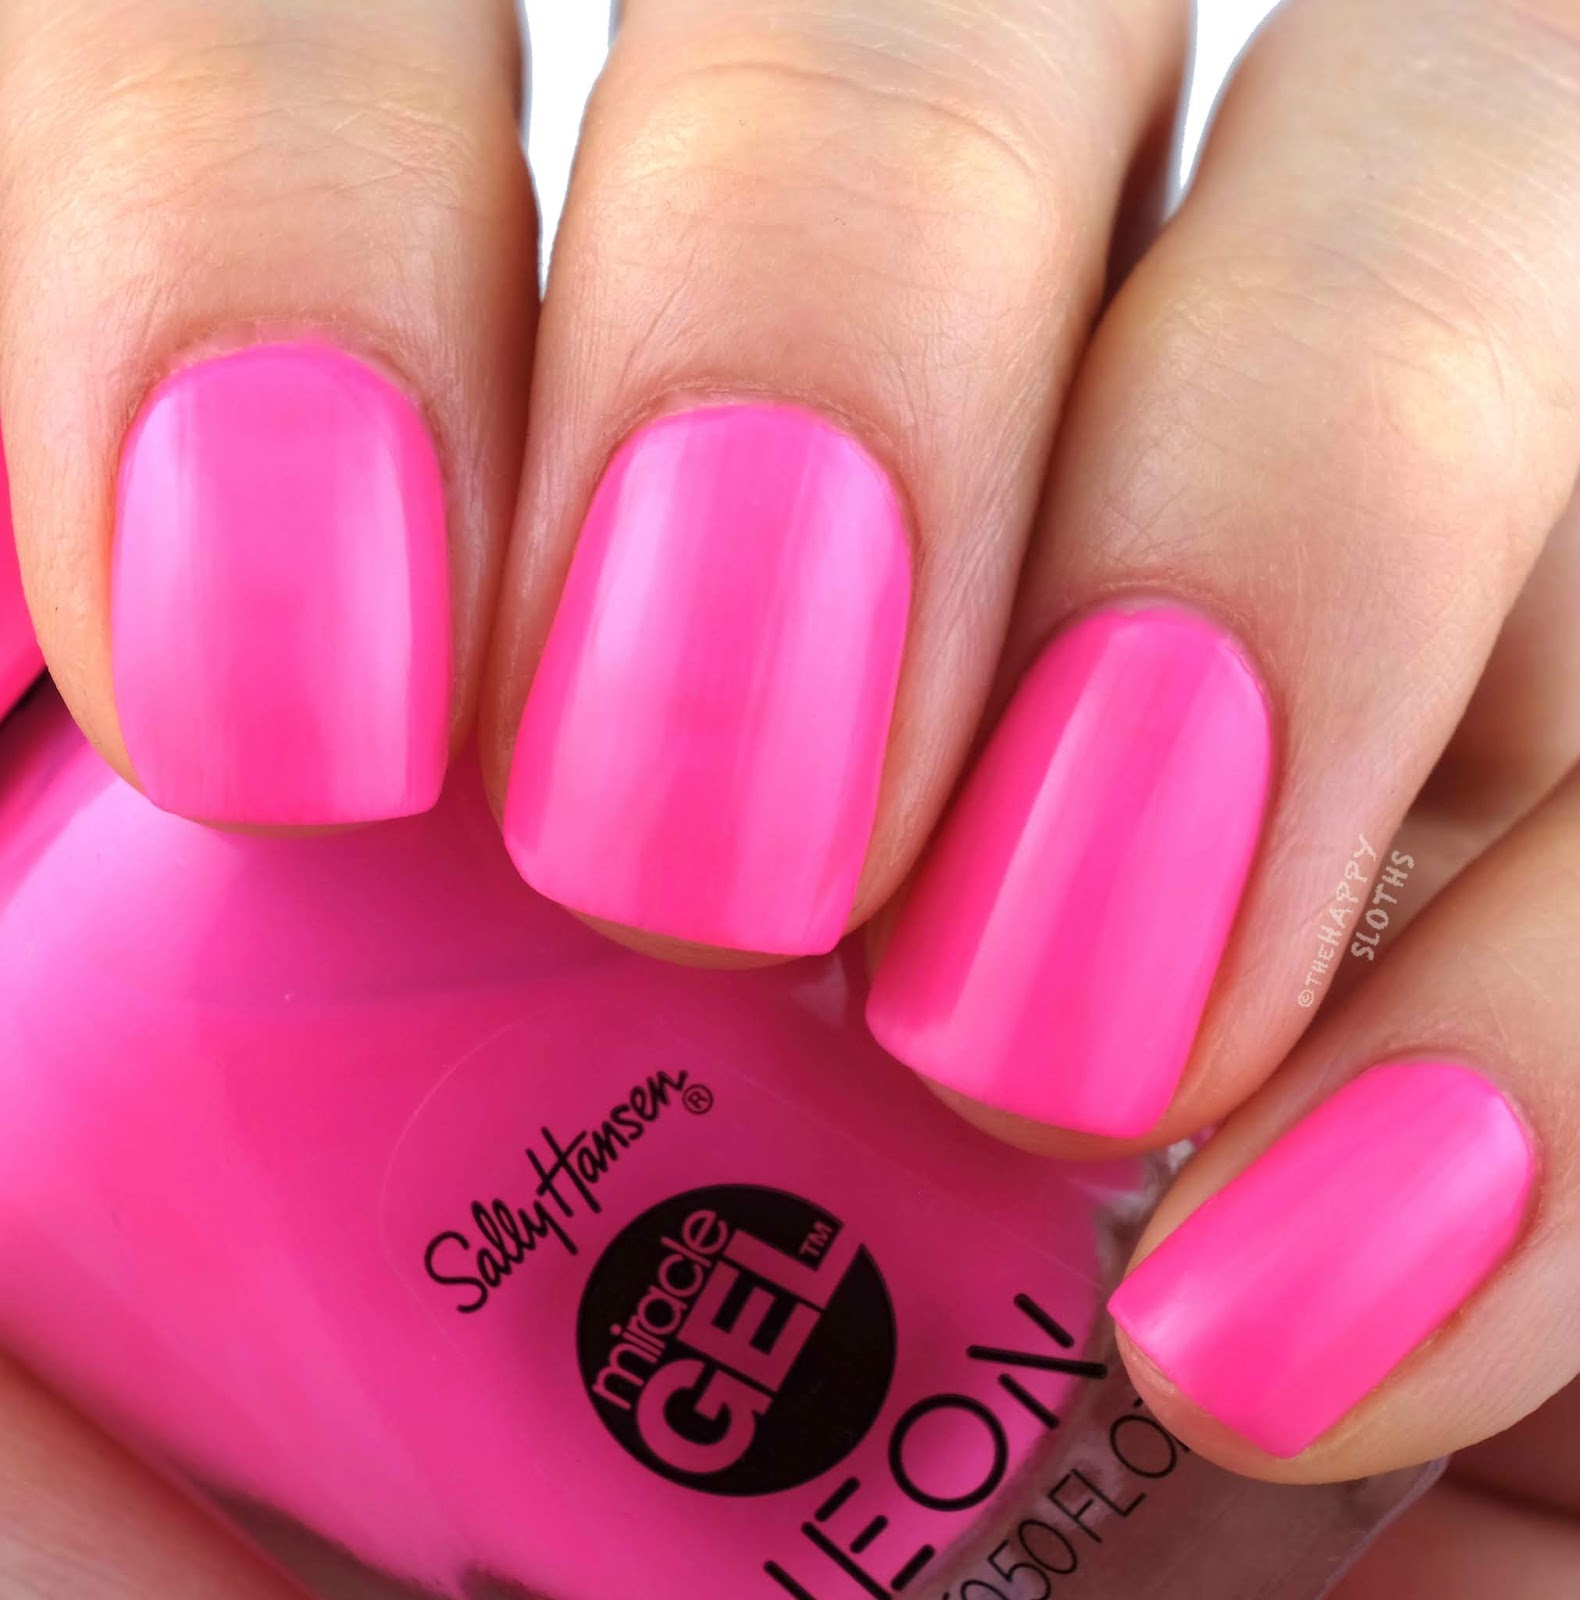 Sally Hansen | Miracle Gel Summer 2019 Neon Collection | Fuchsia Fever: Review and Swatches